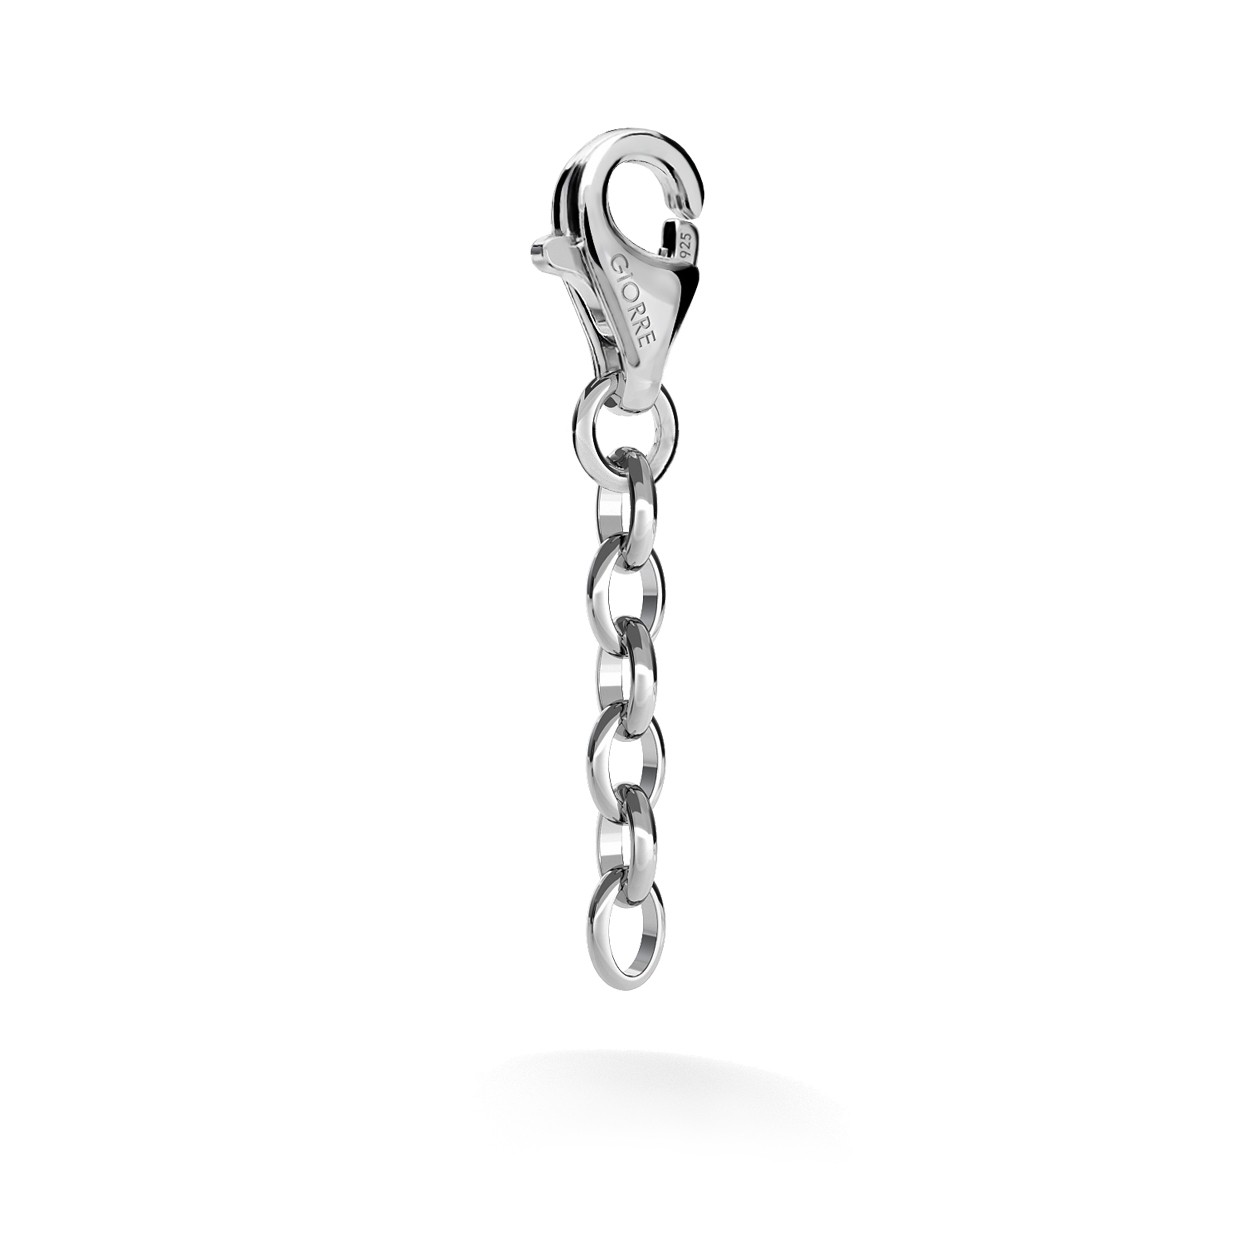 30 MM EXTENSION TO CHARMS GIORRE, STERLING SILVER (925) RHODIUM OR GOLD PLATED